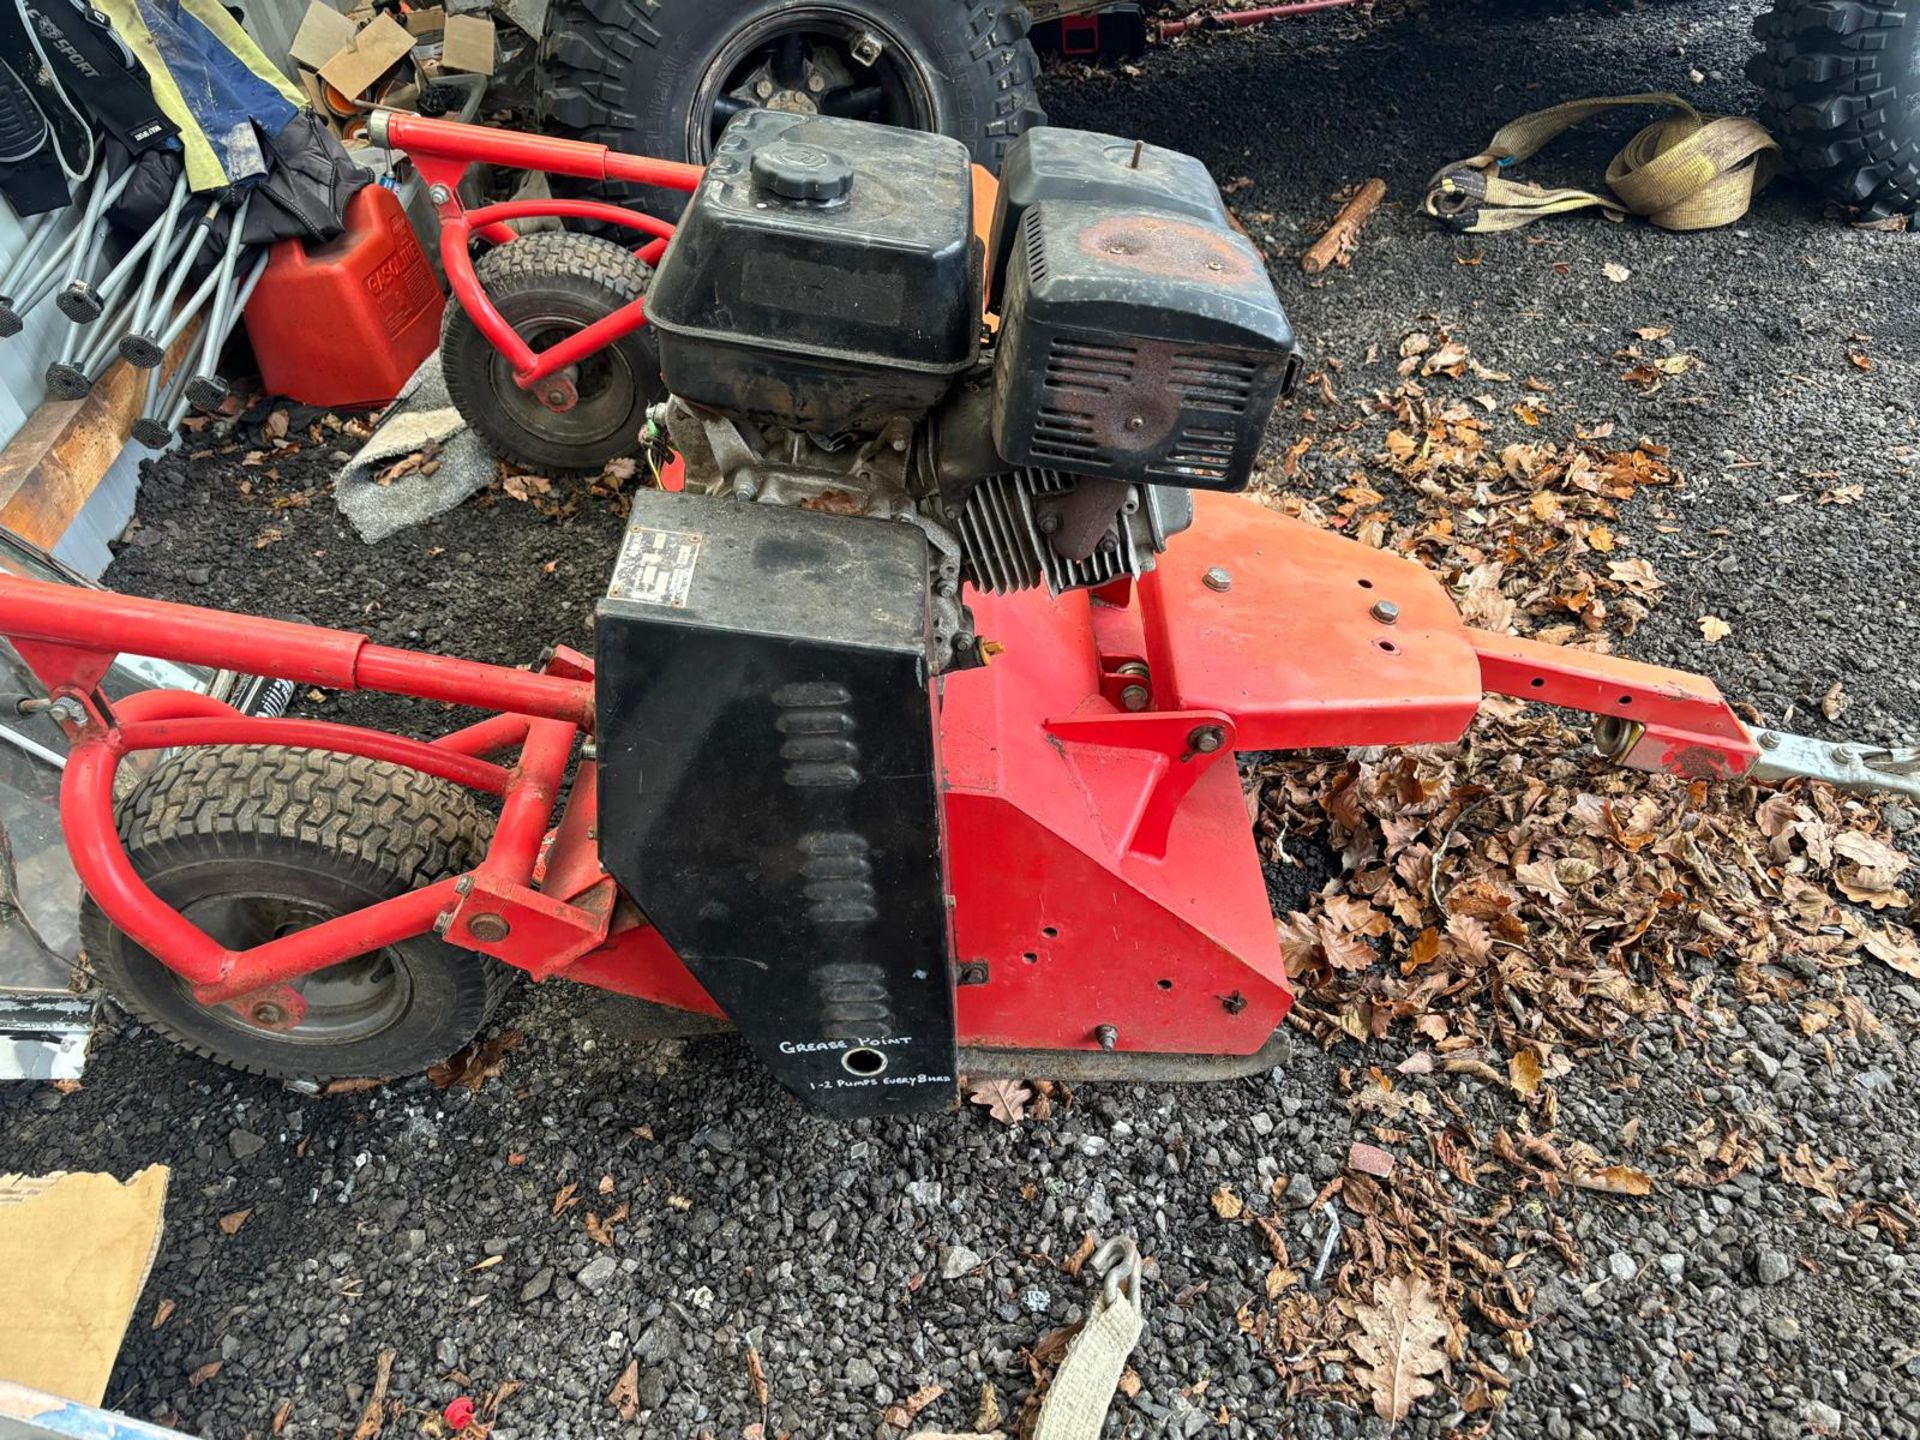 HIGH-PERFORMANCE ATV QUAD BIKE FLAIL MOWER: 4.5FT WIDE, 420CC ENGINE - EXCELLENT CONDITION! - Image 2 of 7